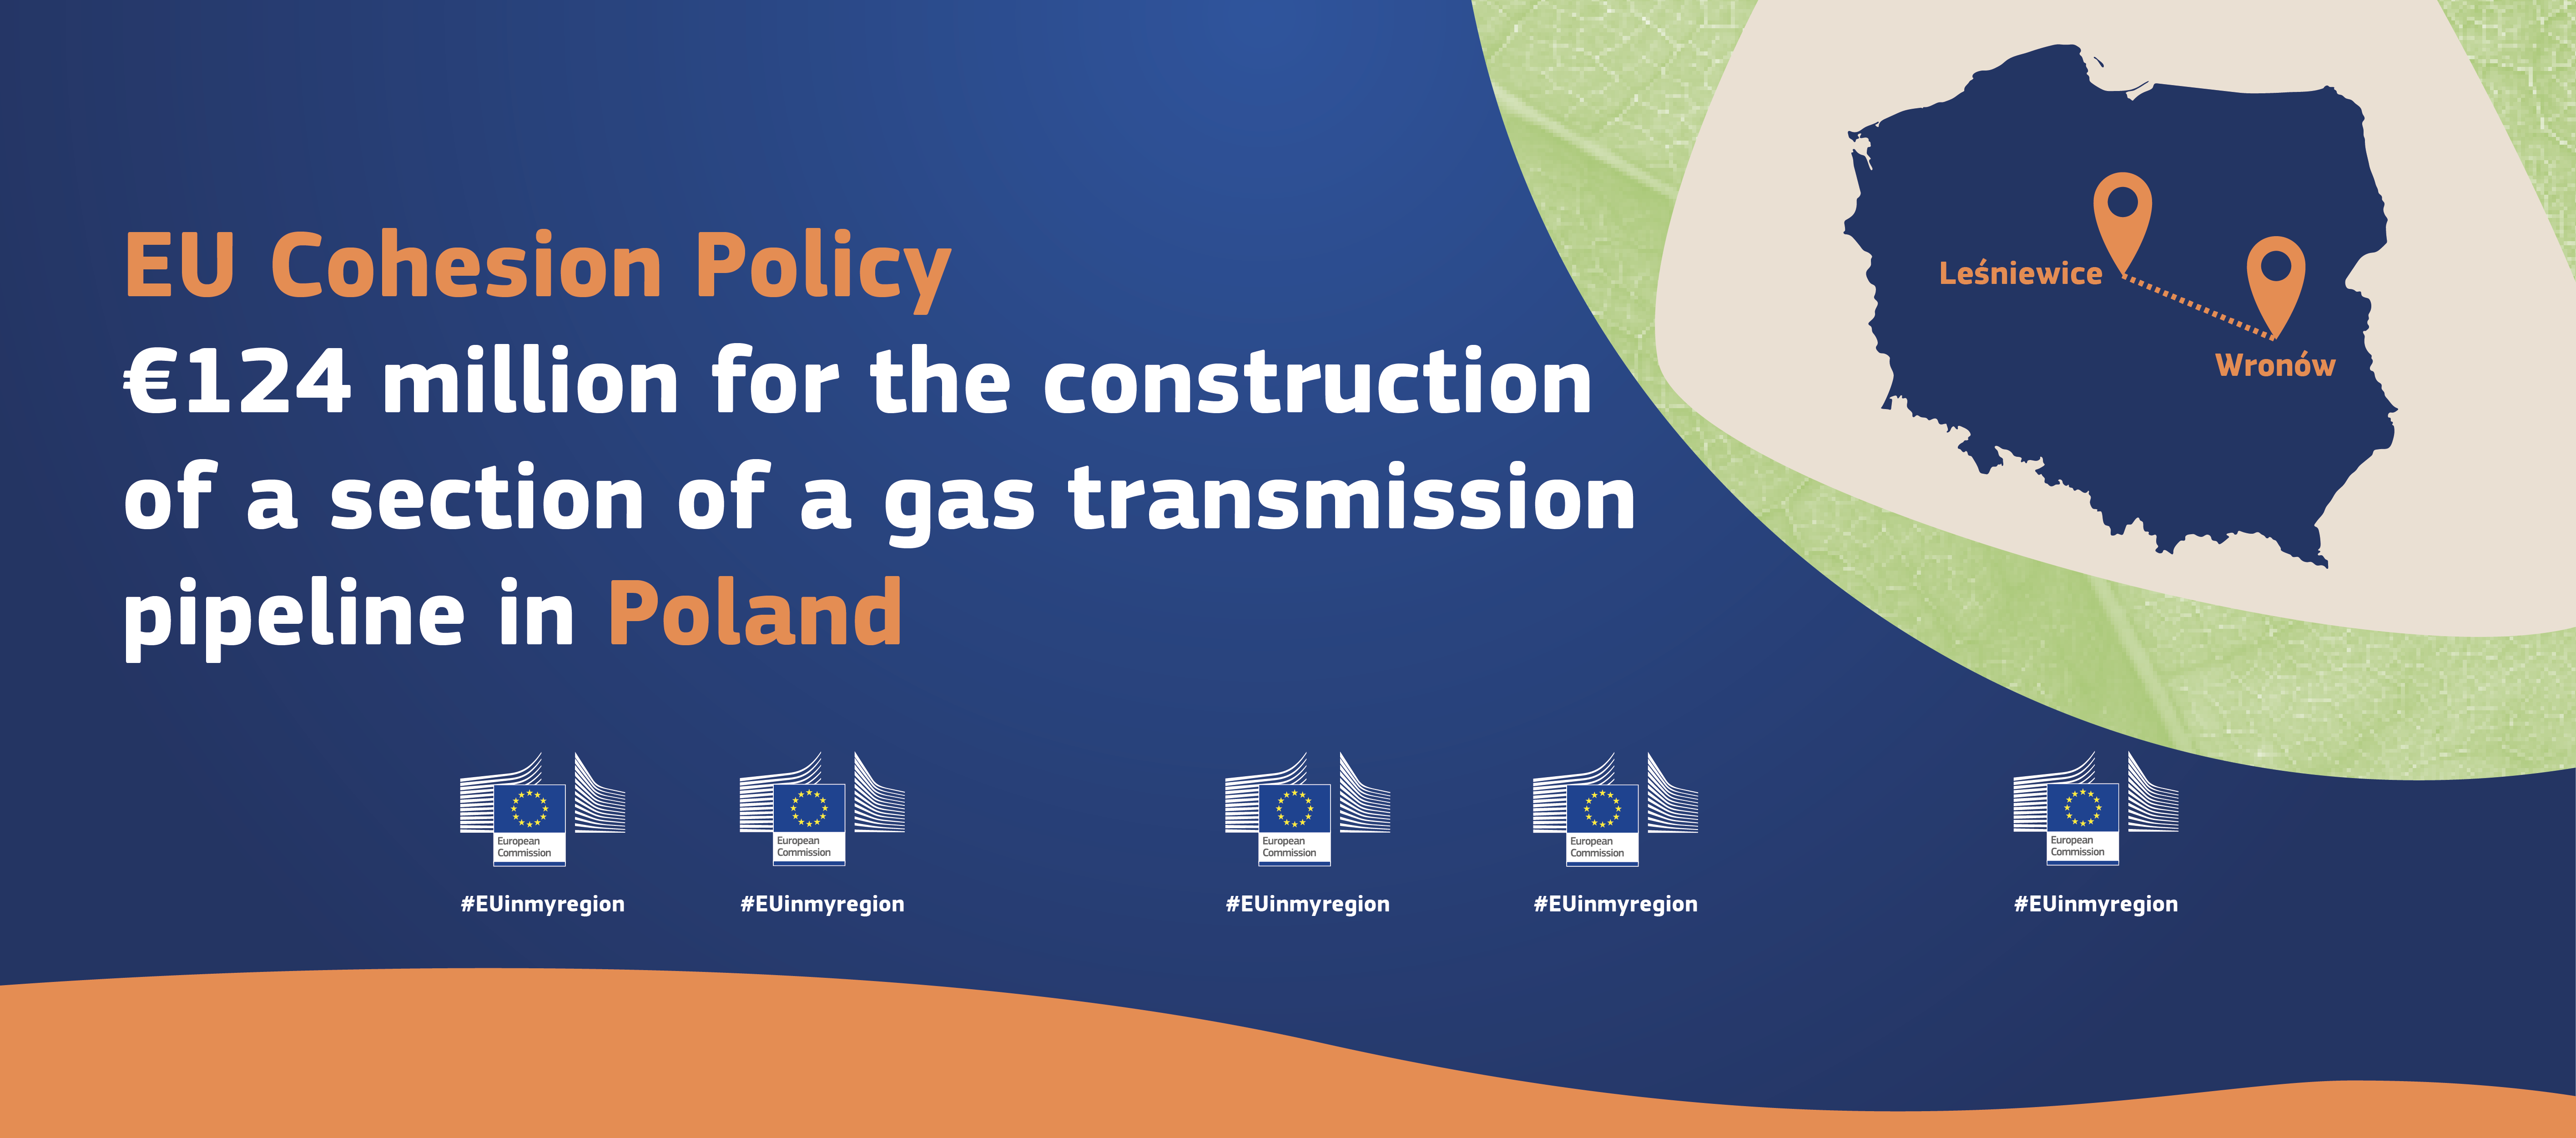 EU Cohesion Policy: €124 million for the construction of a section of a gas transmission pipeline in Poland